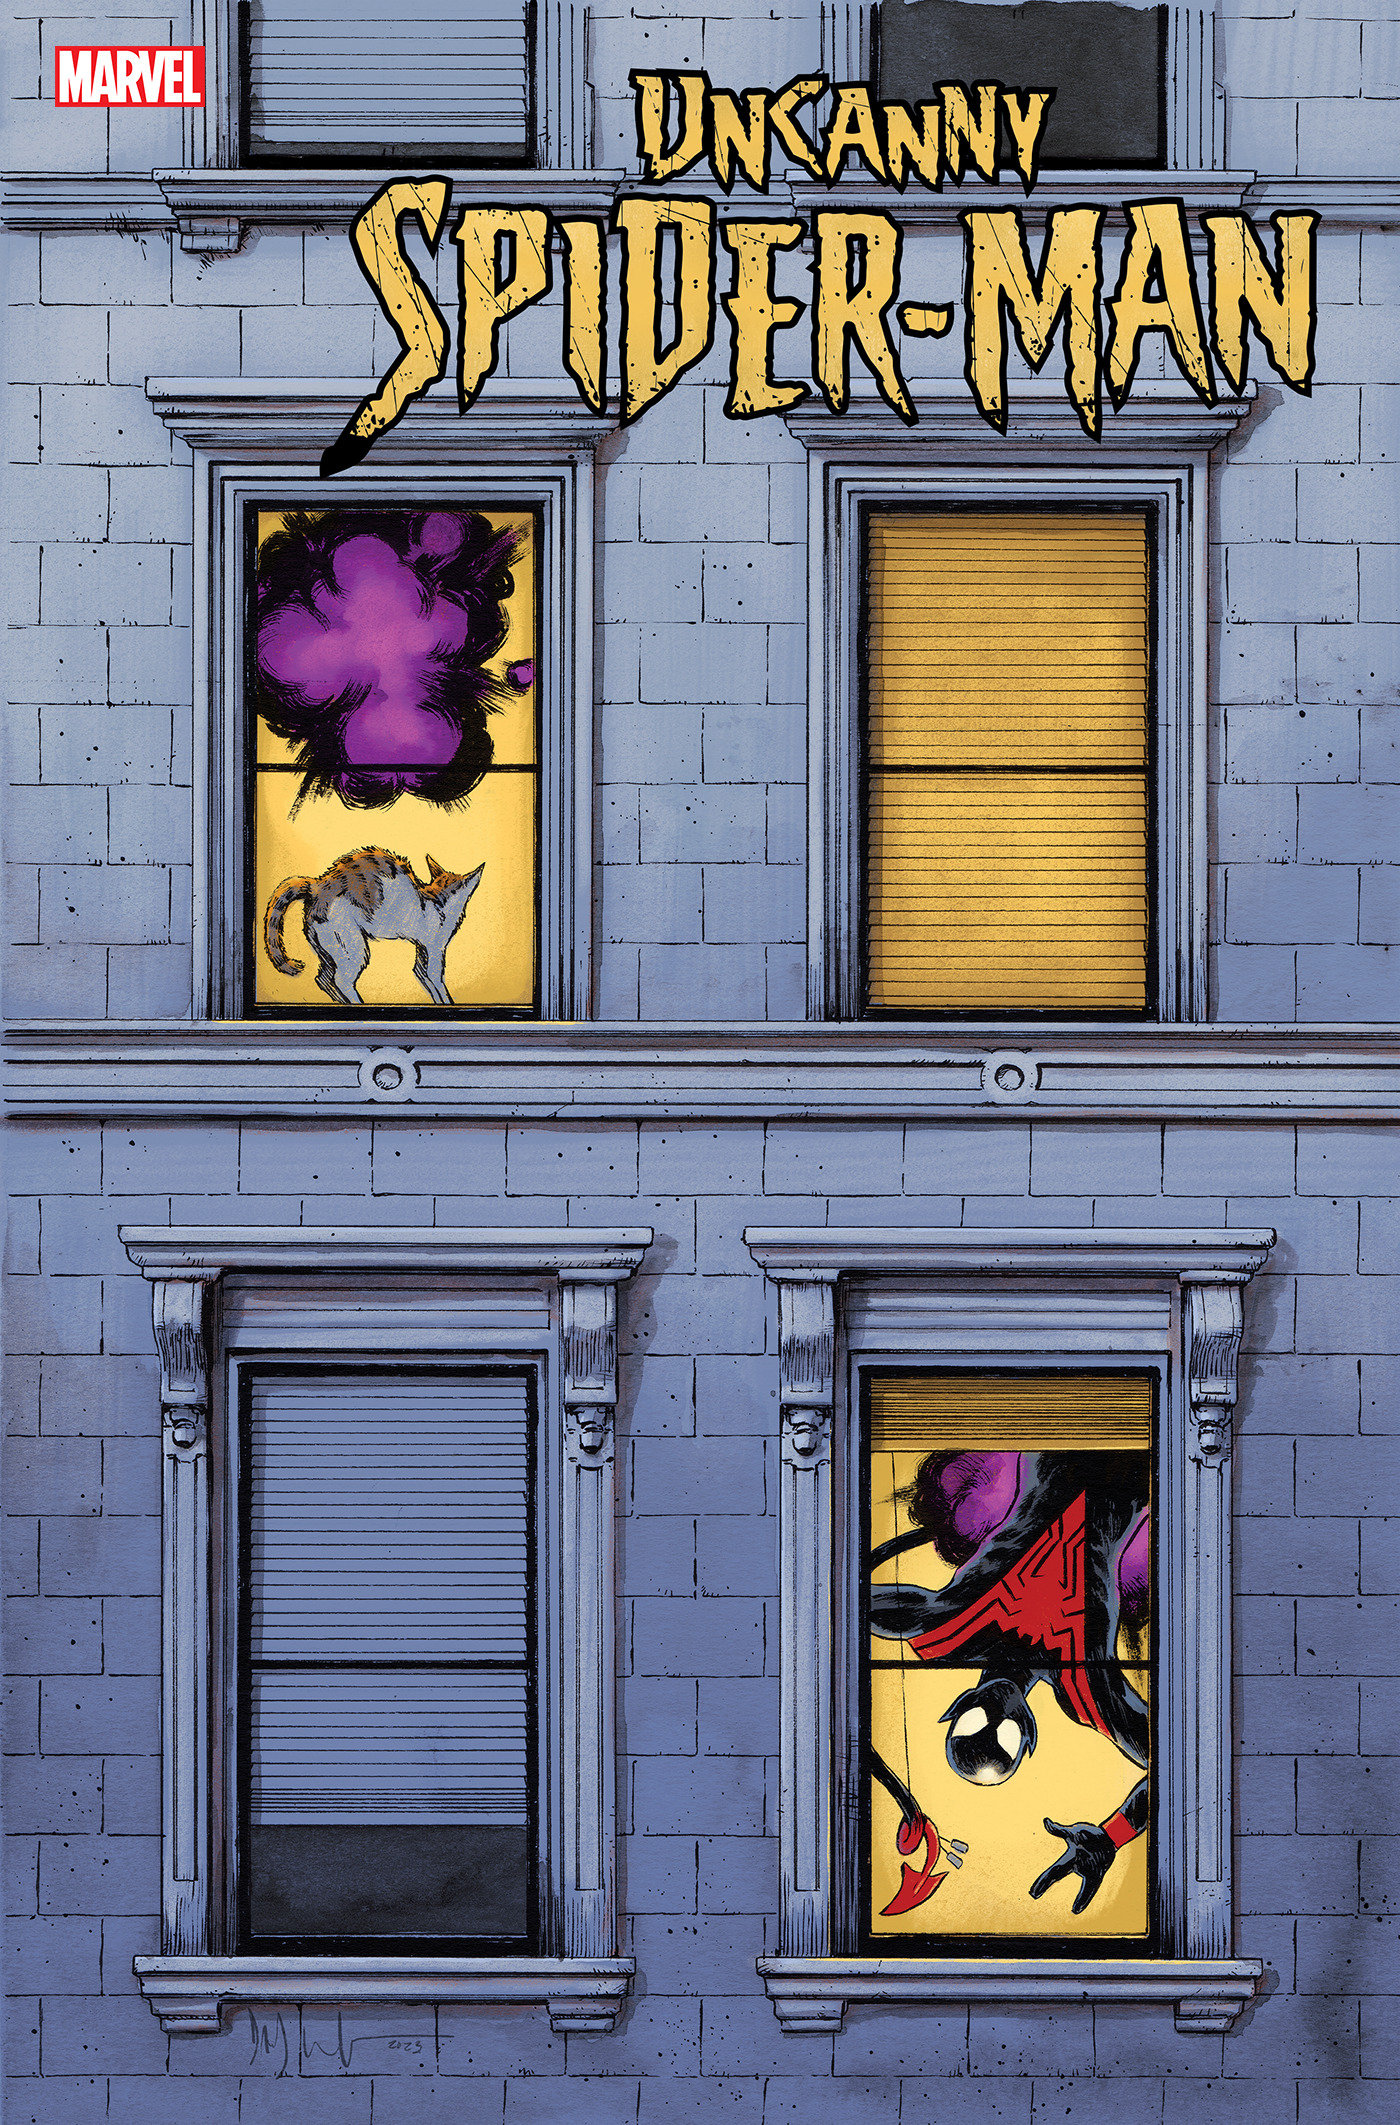 Uncanny Spider-Man #1 Dave Wachter Windowshades Variant (Fall of the X-Men)